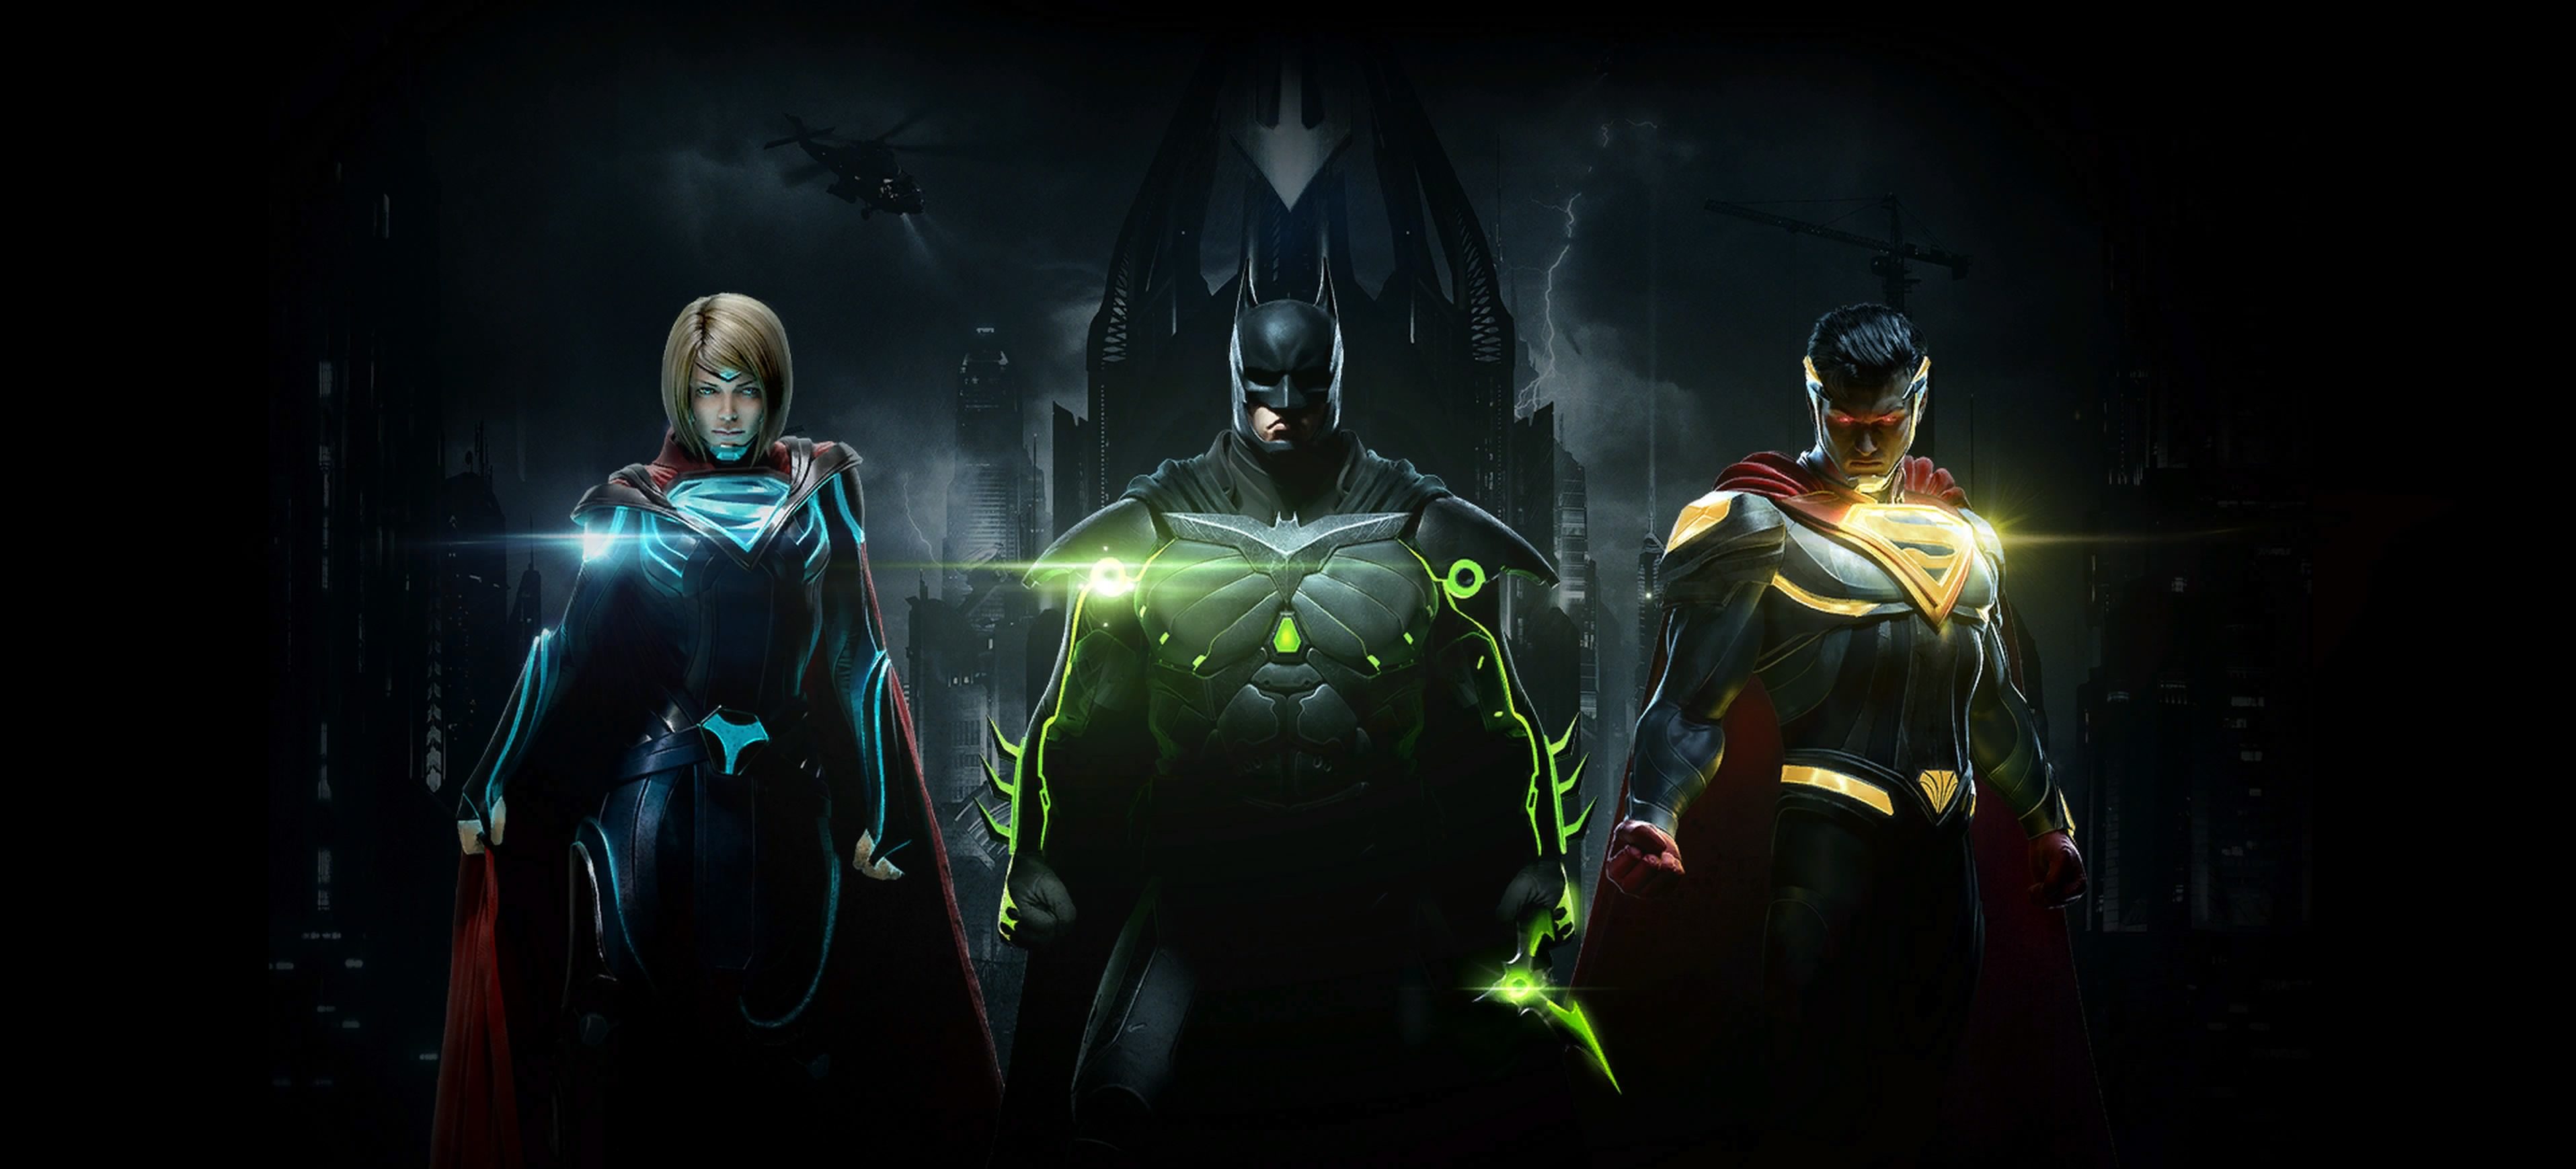 Injustice 2 pc release game